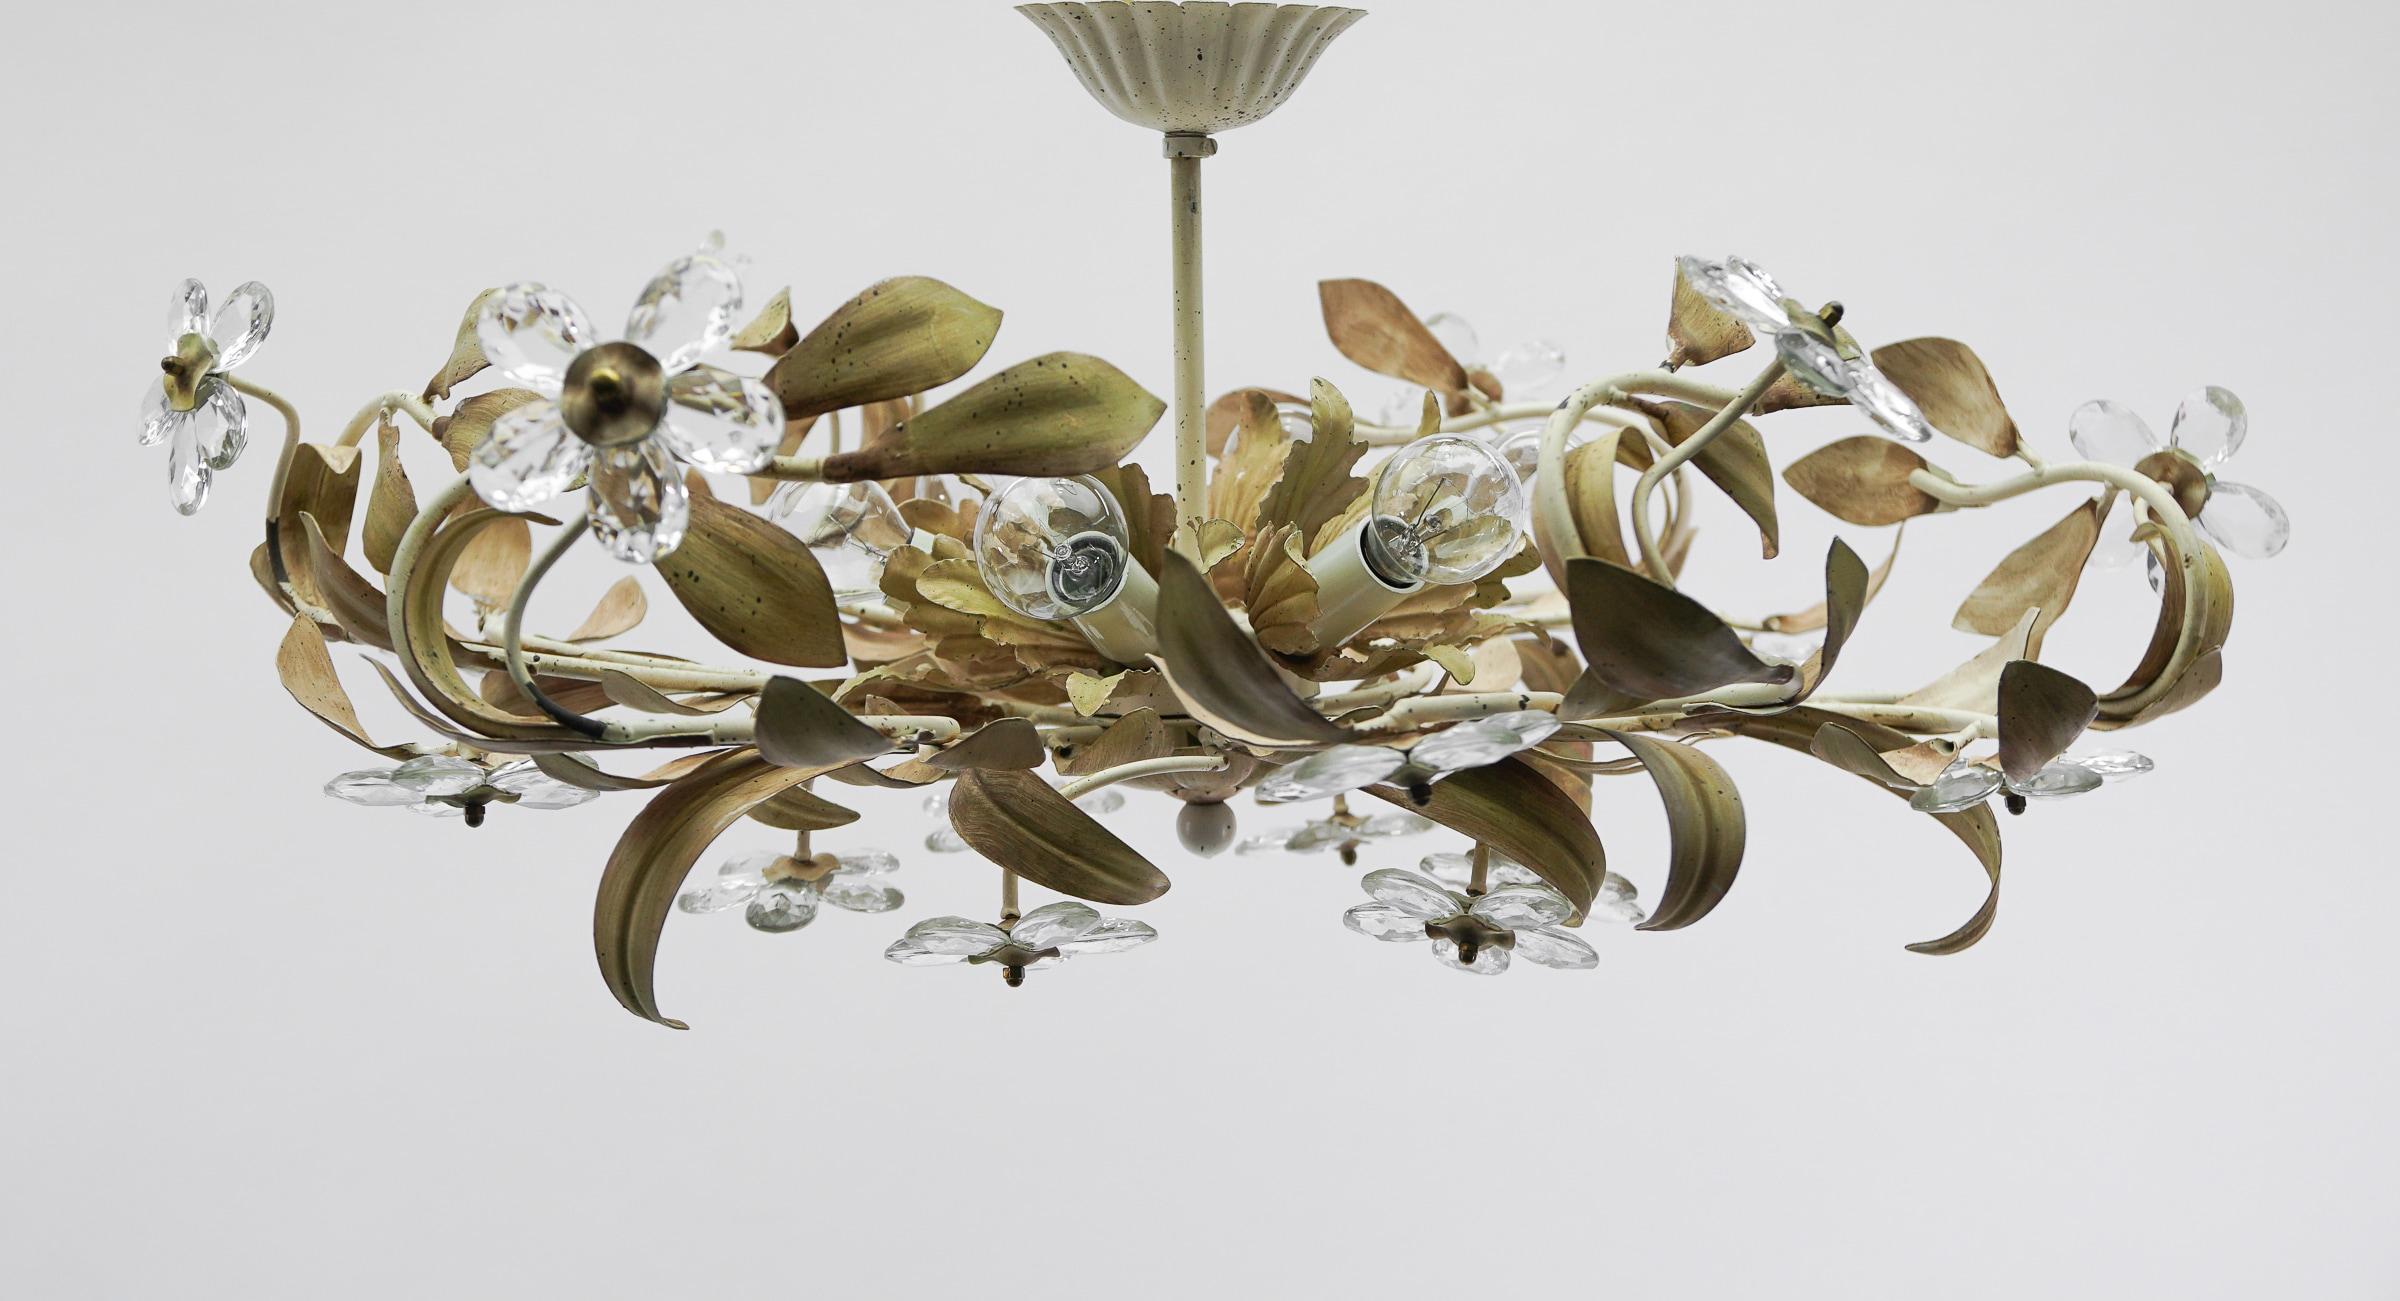 Italian Crystal Glass and Metal Florentine Ceiling Lamp by Banci Firenze, 1960s For Sale 3